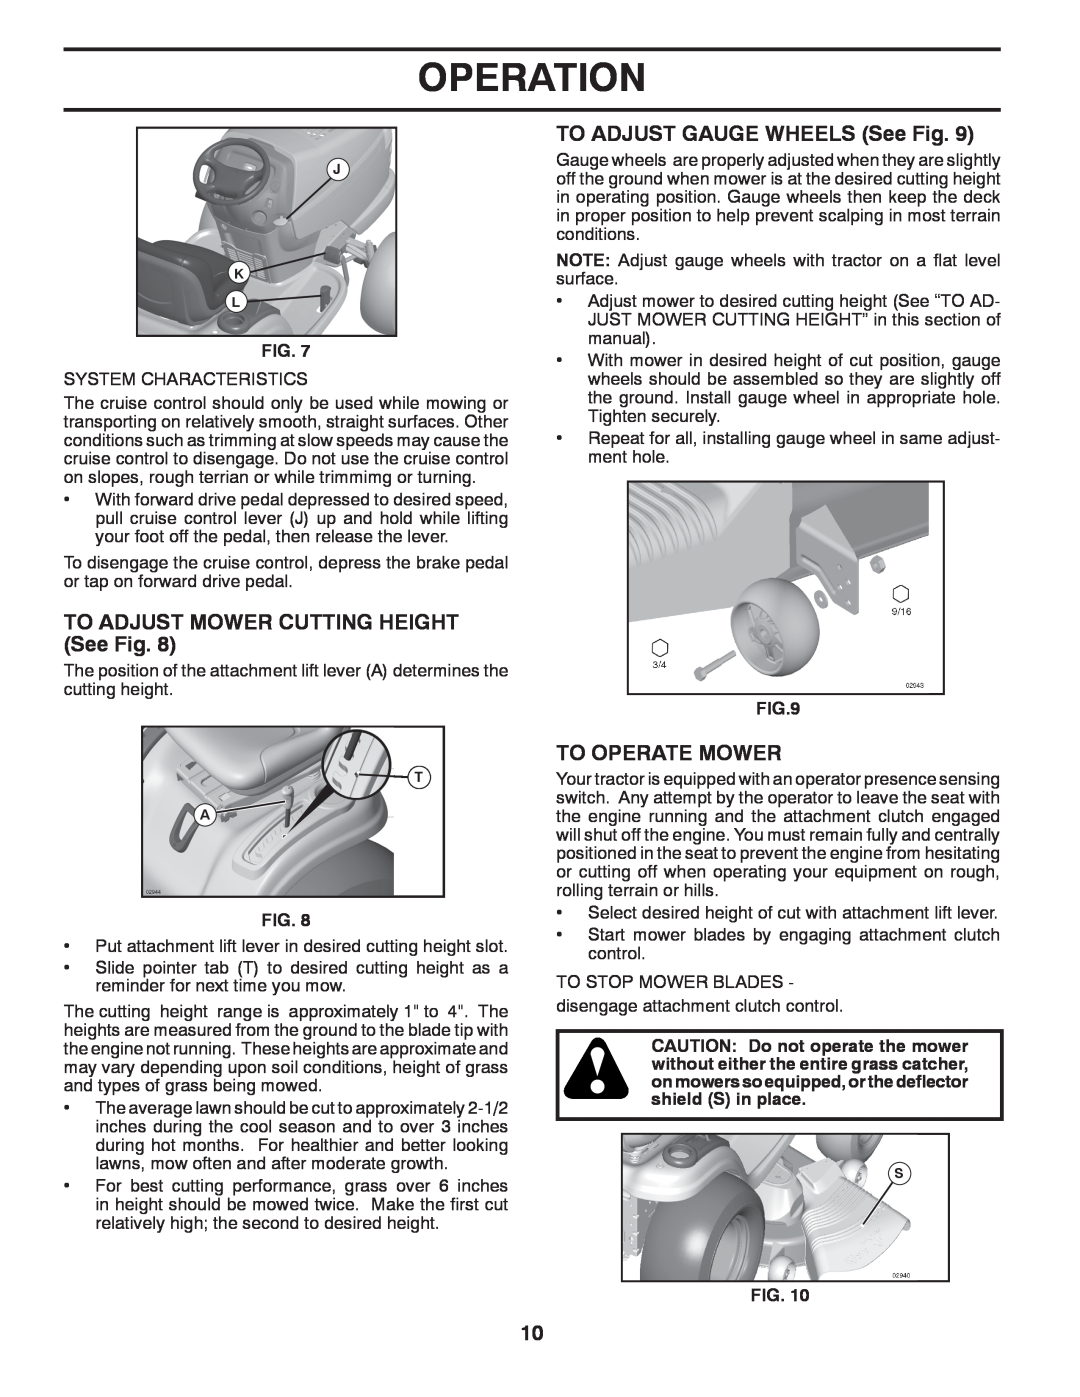 Poulan 411256 manual TO ADJUST MOWER CUTTING HEIGHT See Fig, TO ADJUST GAUGE WHEELS See Fig, To Operate Mower, Operation 